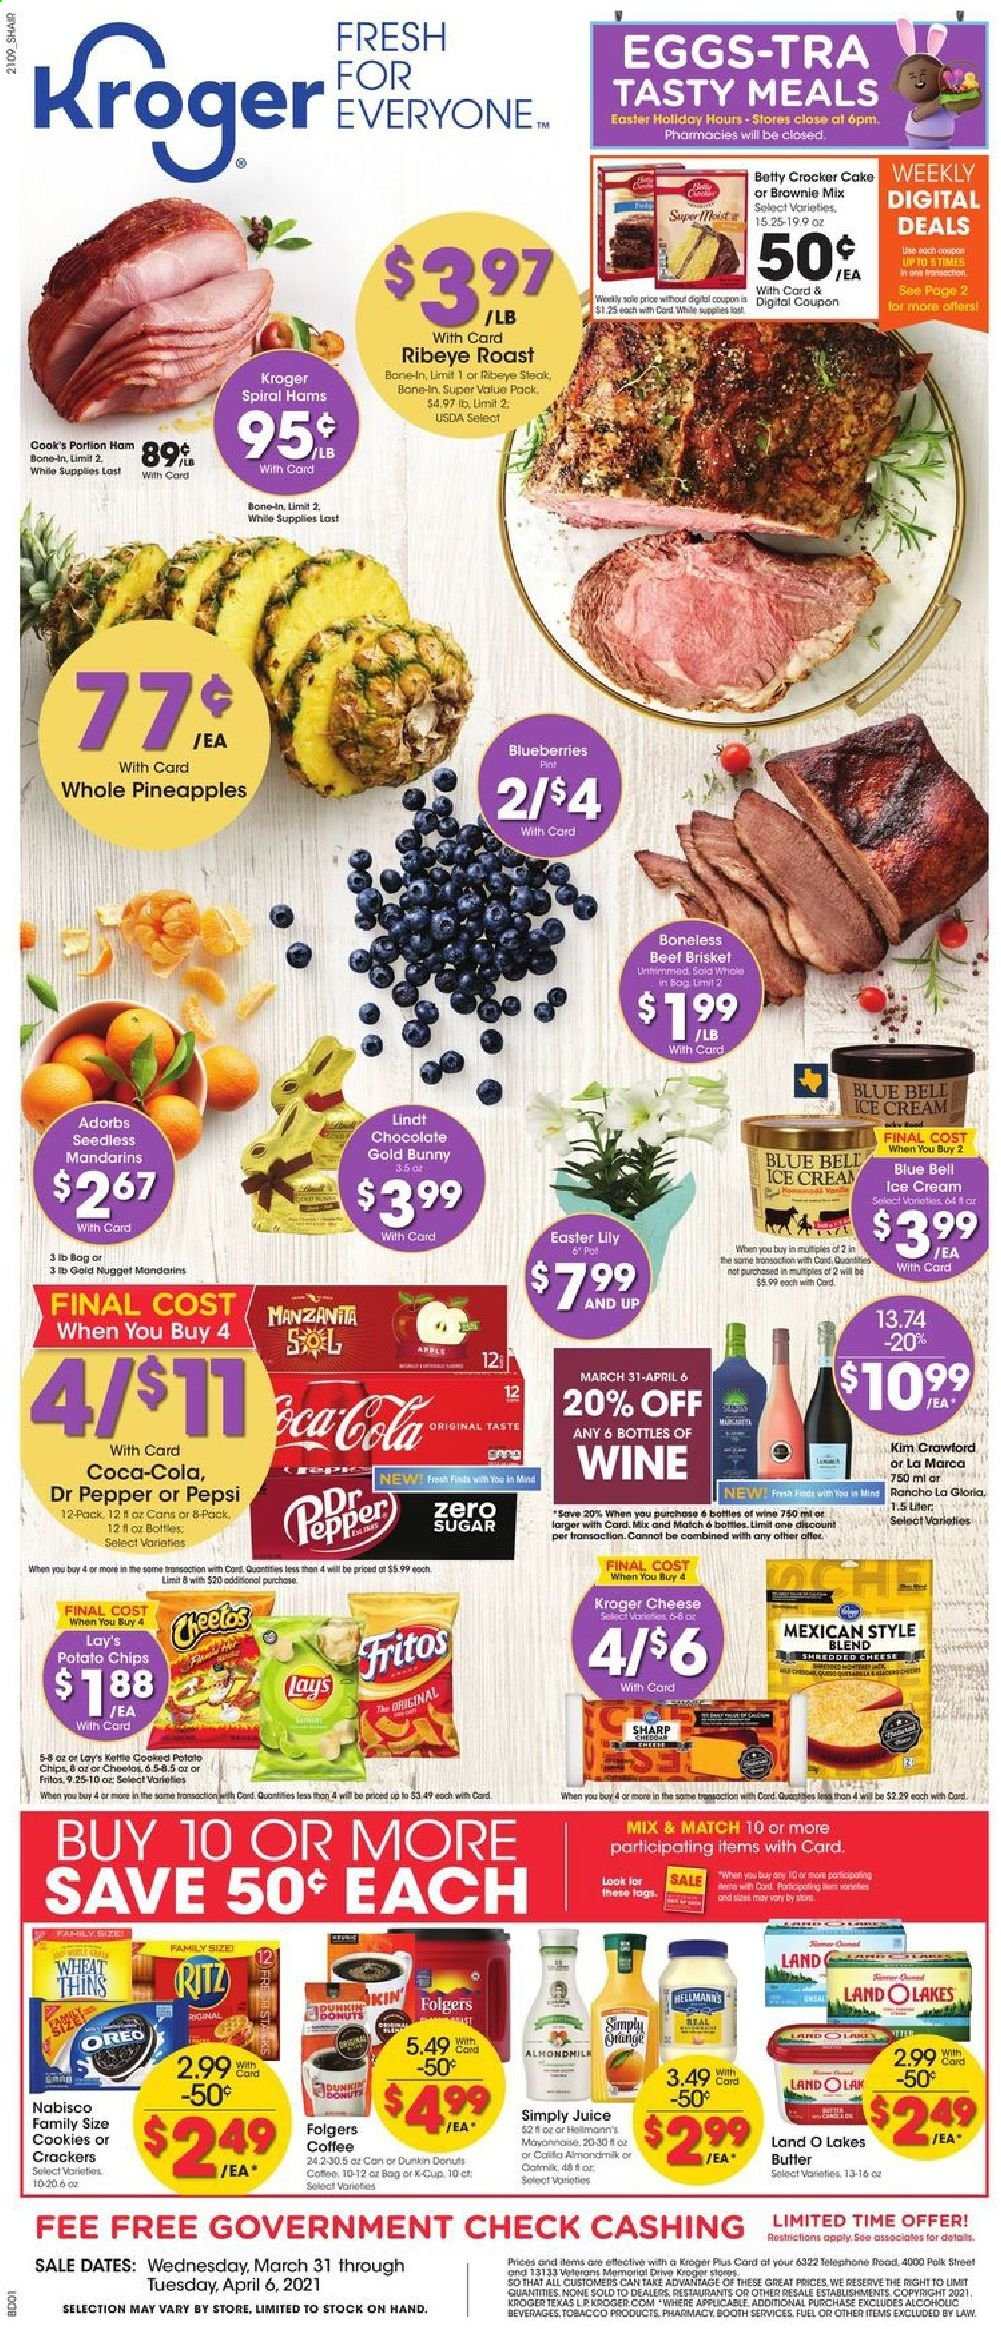 thumbnail - Kroger Flyer - 03/31/2021 - 04/06/2021 - Sales products - blueberries, cake, brownies, donut, ham, shredded cheese, Oreo, almond milk, eggs, butter, mayonnaise, ice cream, Blue Bell, cookies, chocolate, Lindt, crackers, RITZ, potato chips, Cheetos, chips, Lay’s, Thins, mandarines, Fritos, Coca-Cola, Pepsi, juice, Dr. Pepper, coffee, Folgers, coffee capsules, L'Or, K-Cups, wine, Cook's, beef meat, beef steak, steak, ribeye steak, beef brisket, pot, Sharp, pineapple. Page 1.